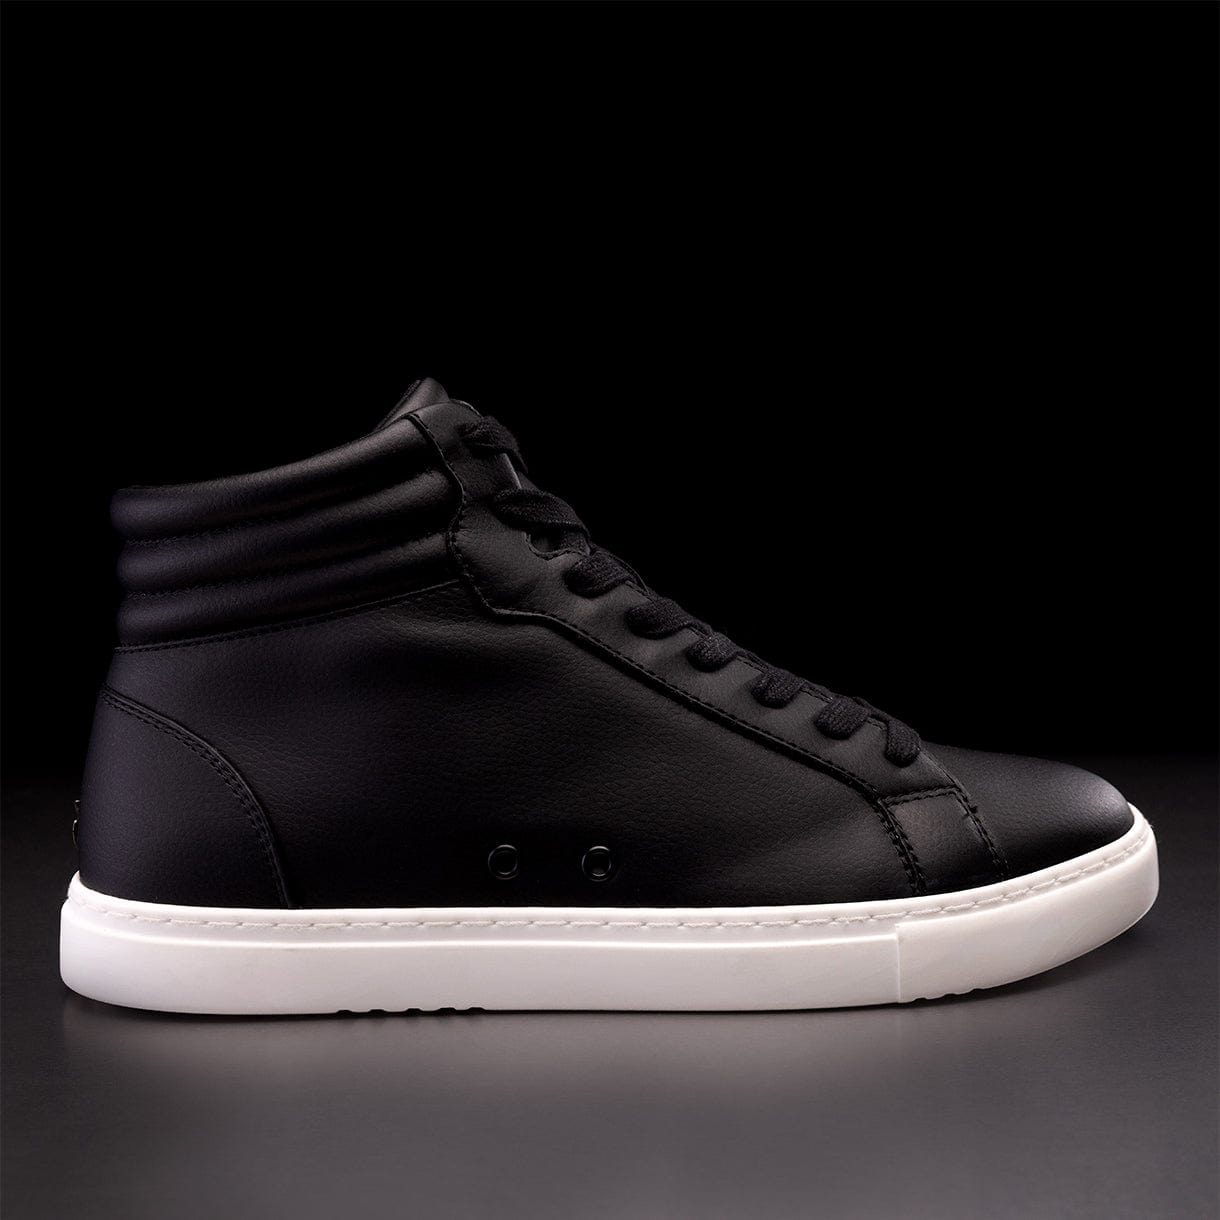 Top more than 238 high sneakers black latest